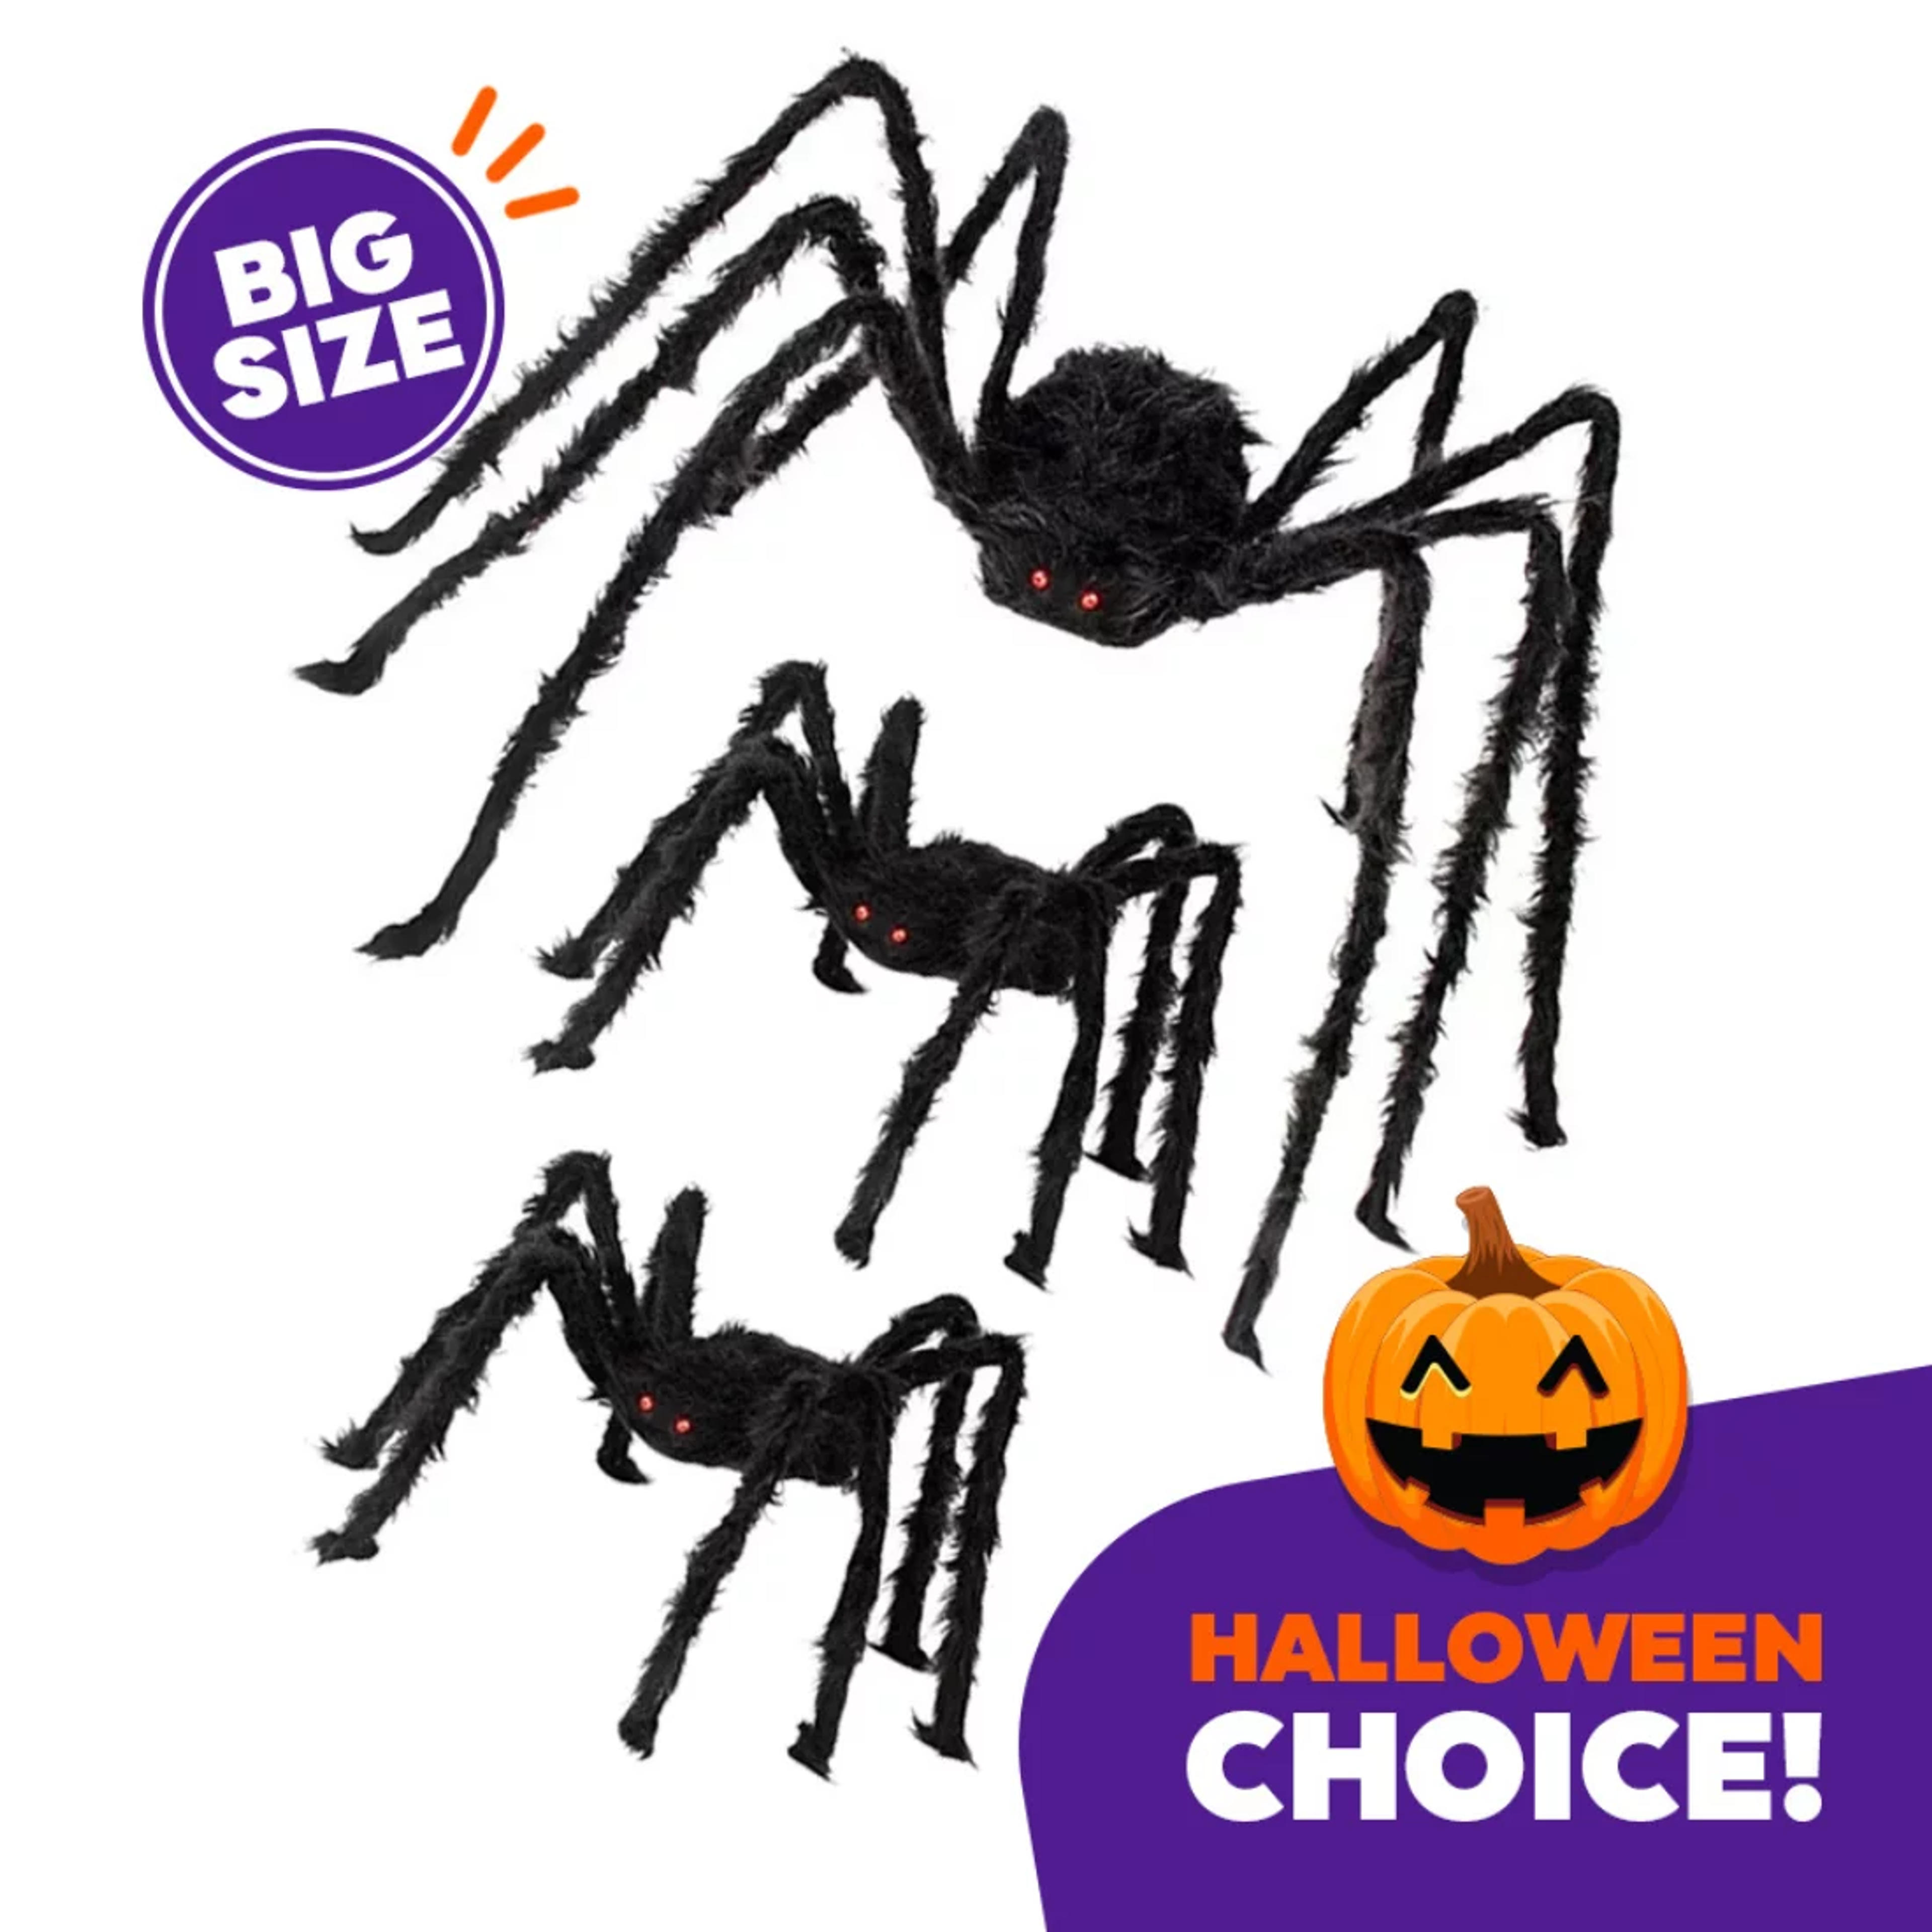 3 Pack Halloween Realistic BIG Spider Decoration Set, Scary Hairy Giant Spiders with Red Eyes and Bendable Legs for Patio, Yard, House, Wall Outdoor Decoration 5 Ft and 3 Ft - Walmart.com